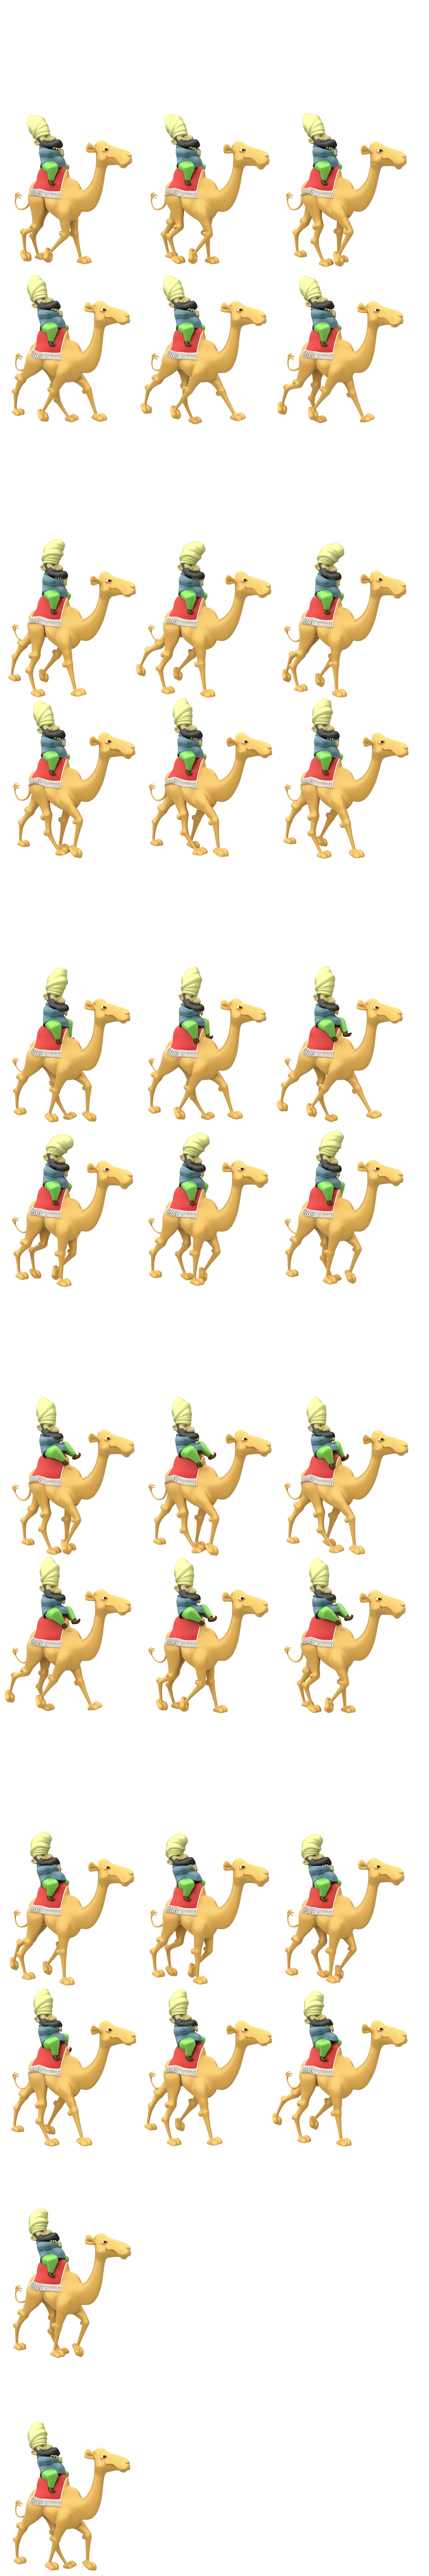 KID PIX 5: The STEAM Edition - Camel Guy